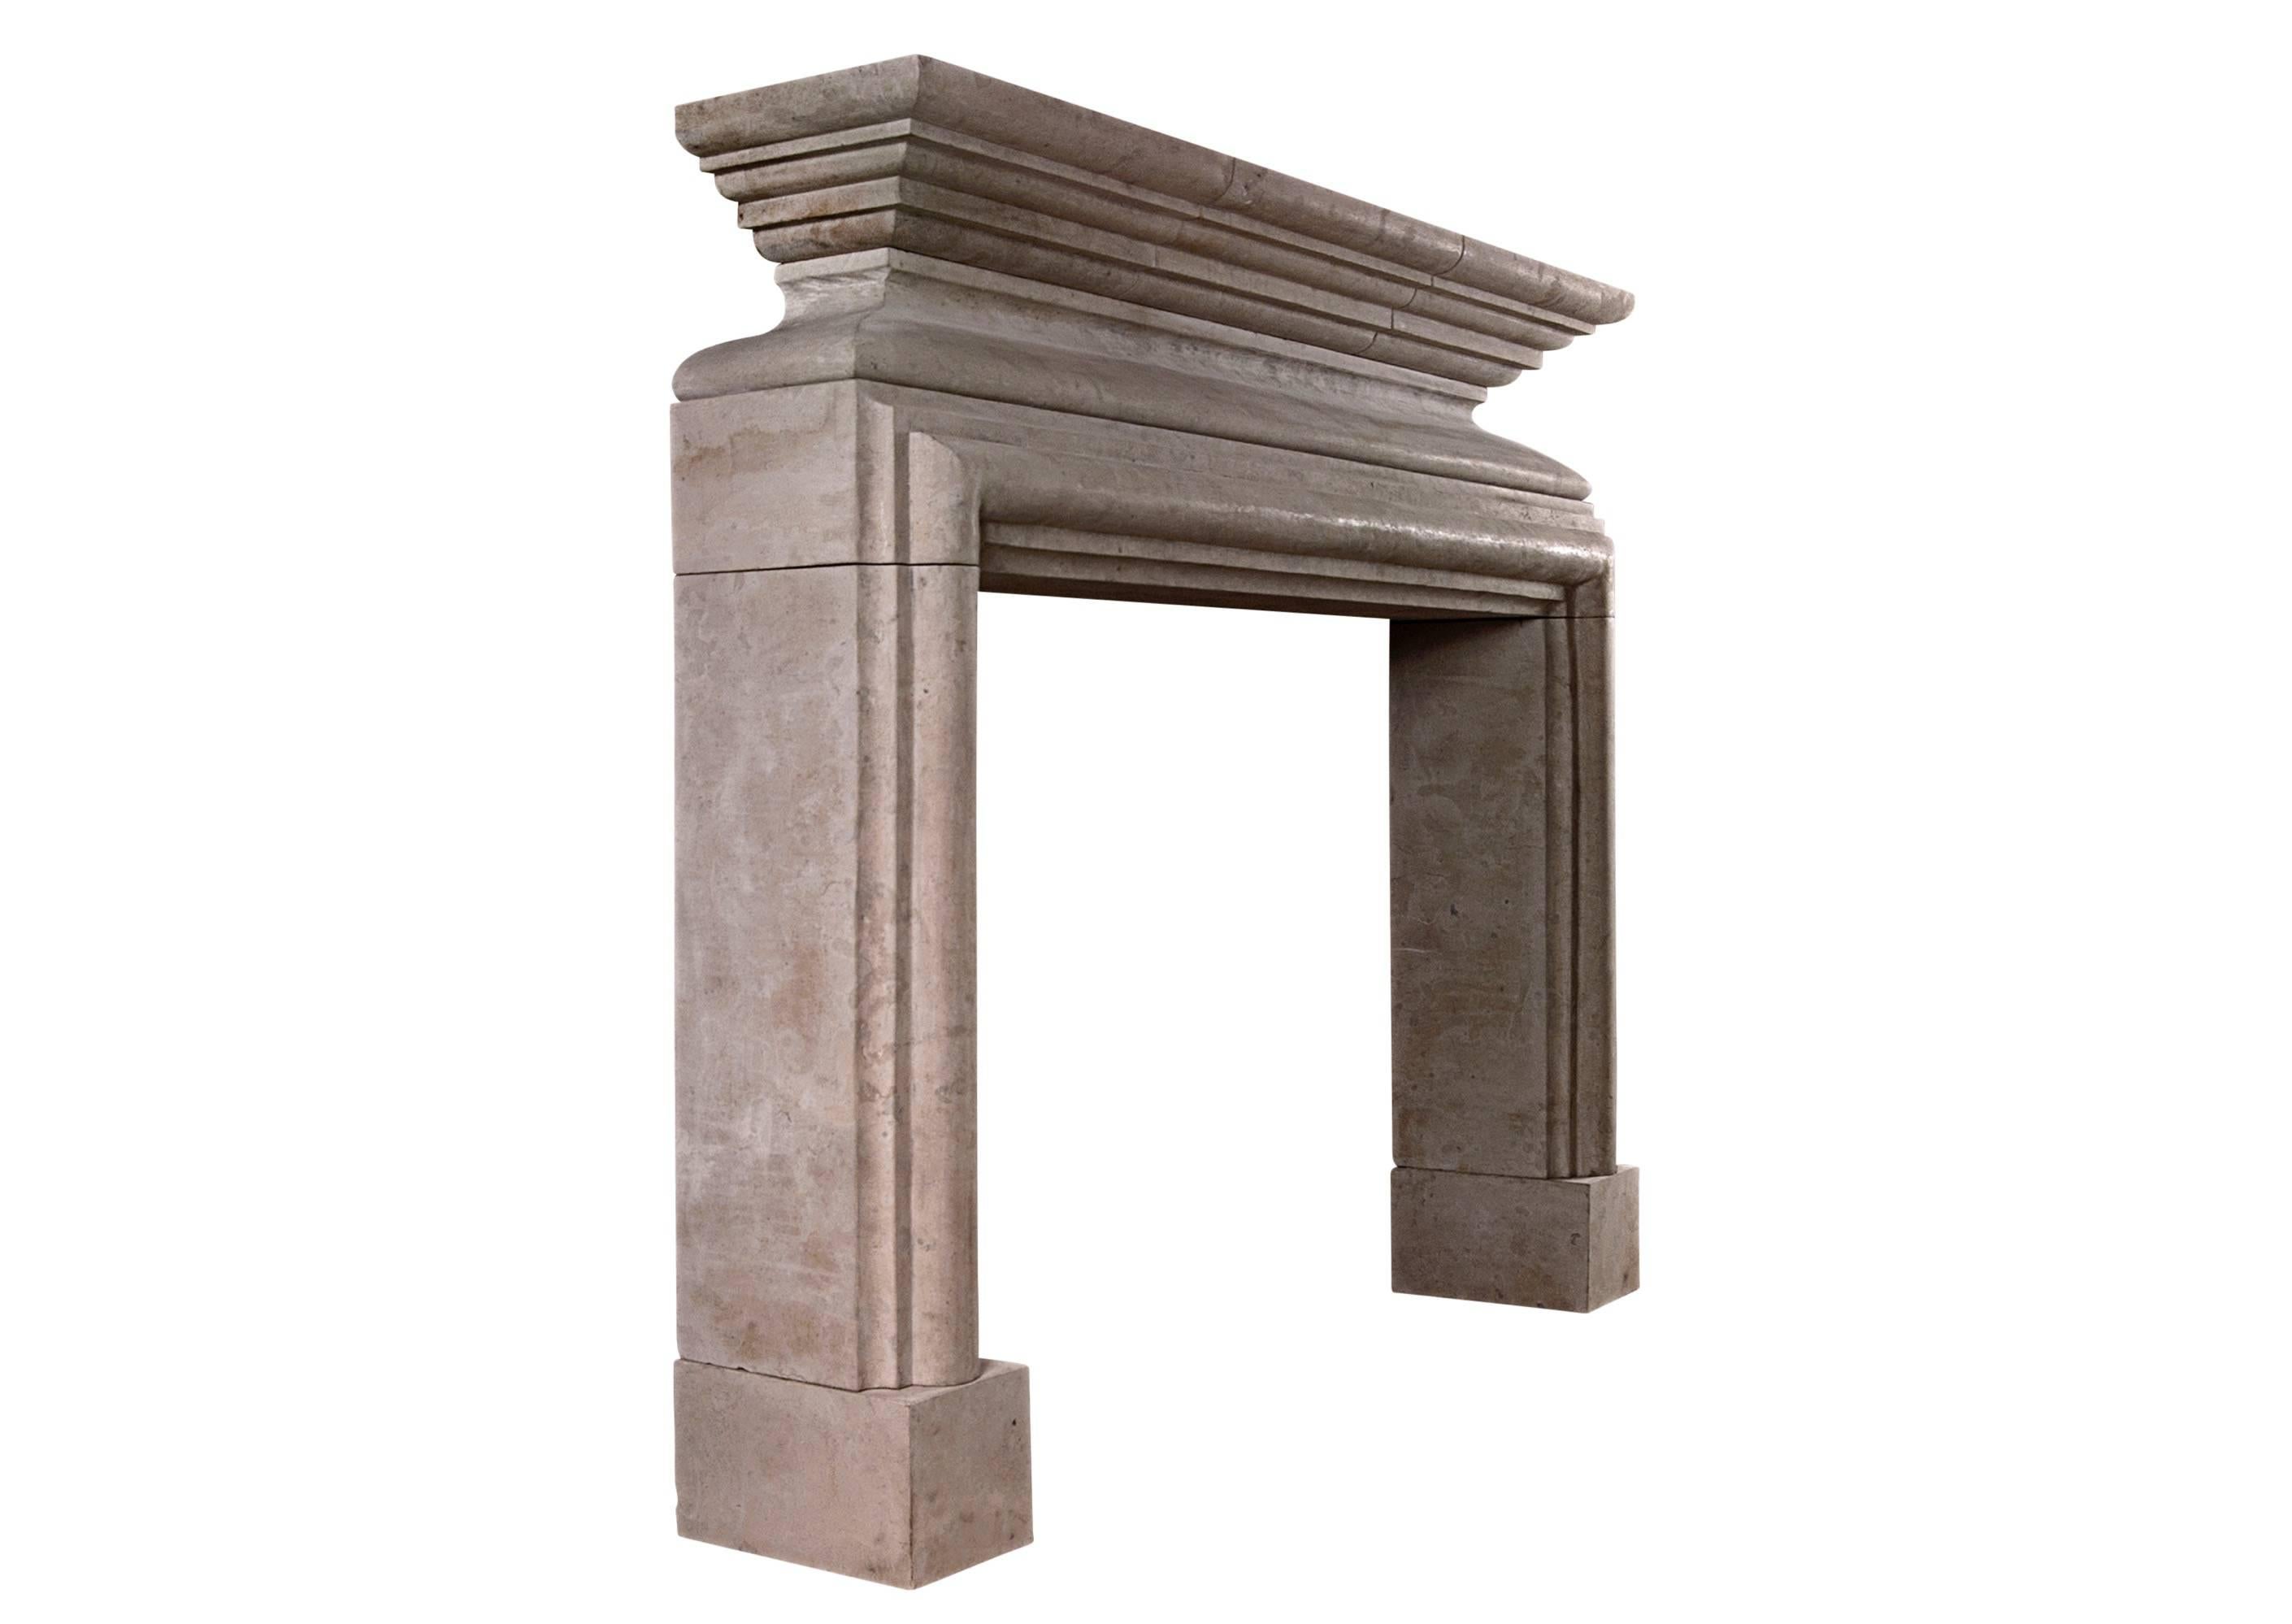 A French Louis XIII style limestone fireplace, with heavy architectural inner moulding, with shaped scalloped frieze, surmounted by moulded shelf in three pieces. A rustic piece.

N.B. May be subject to an extended lead time, please enquire for more